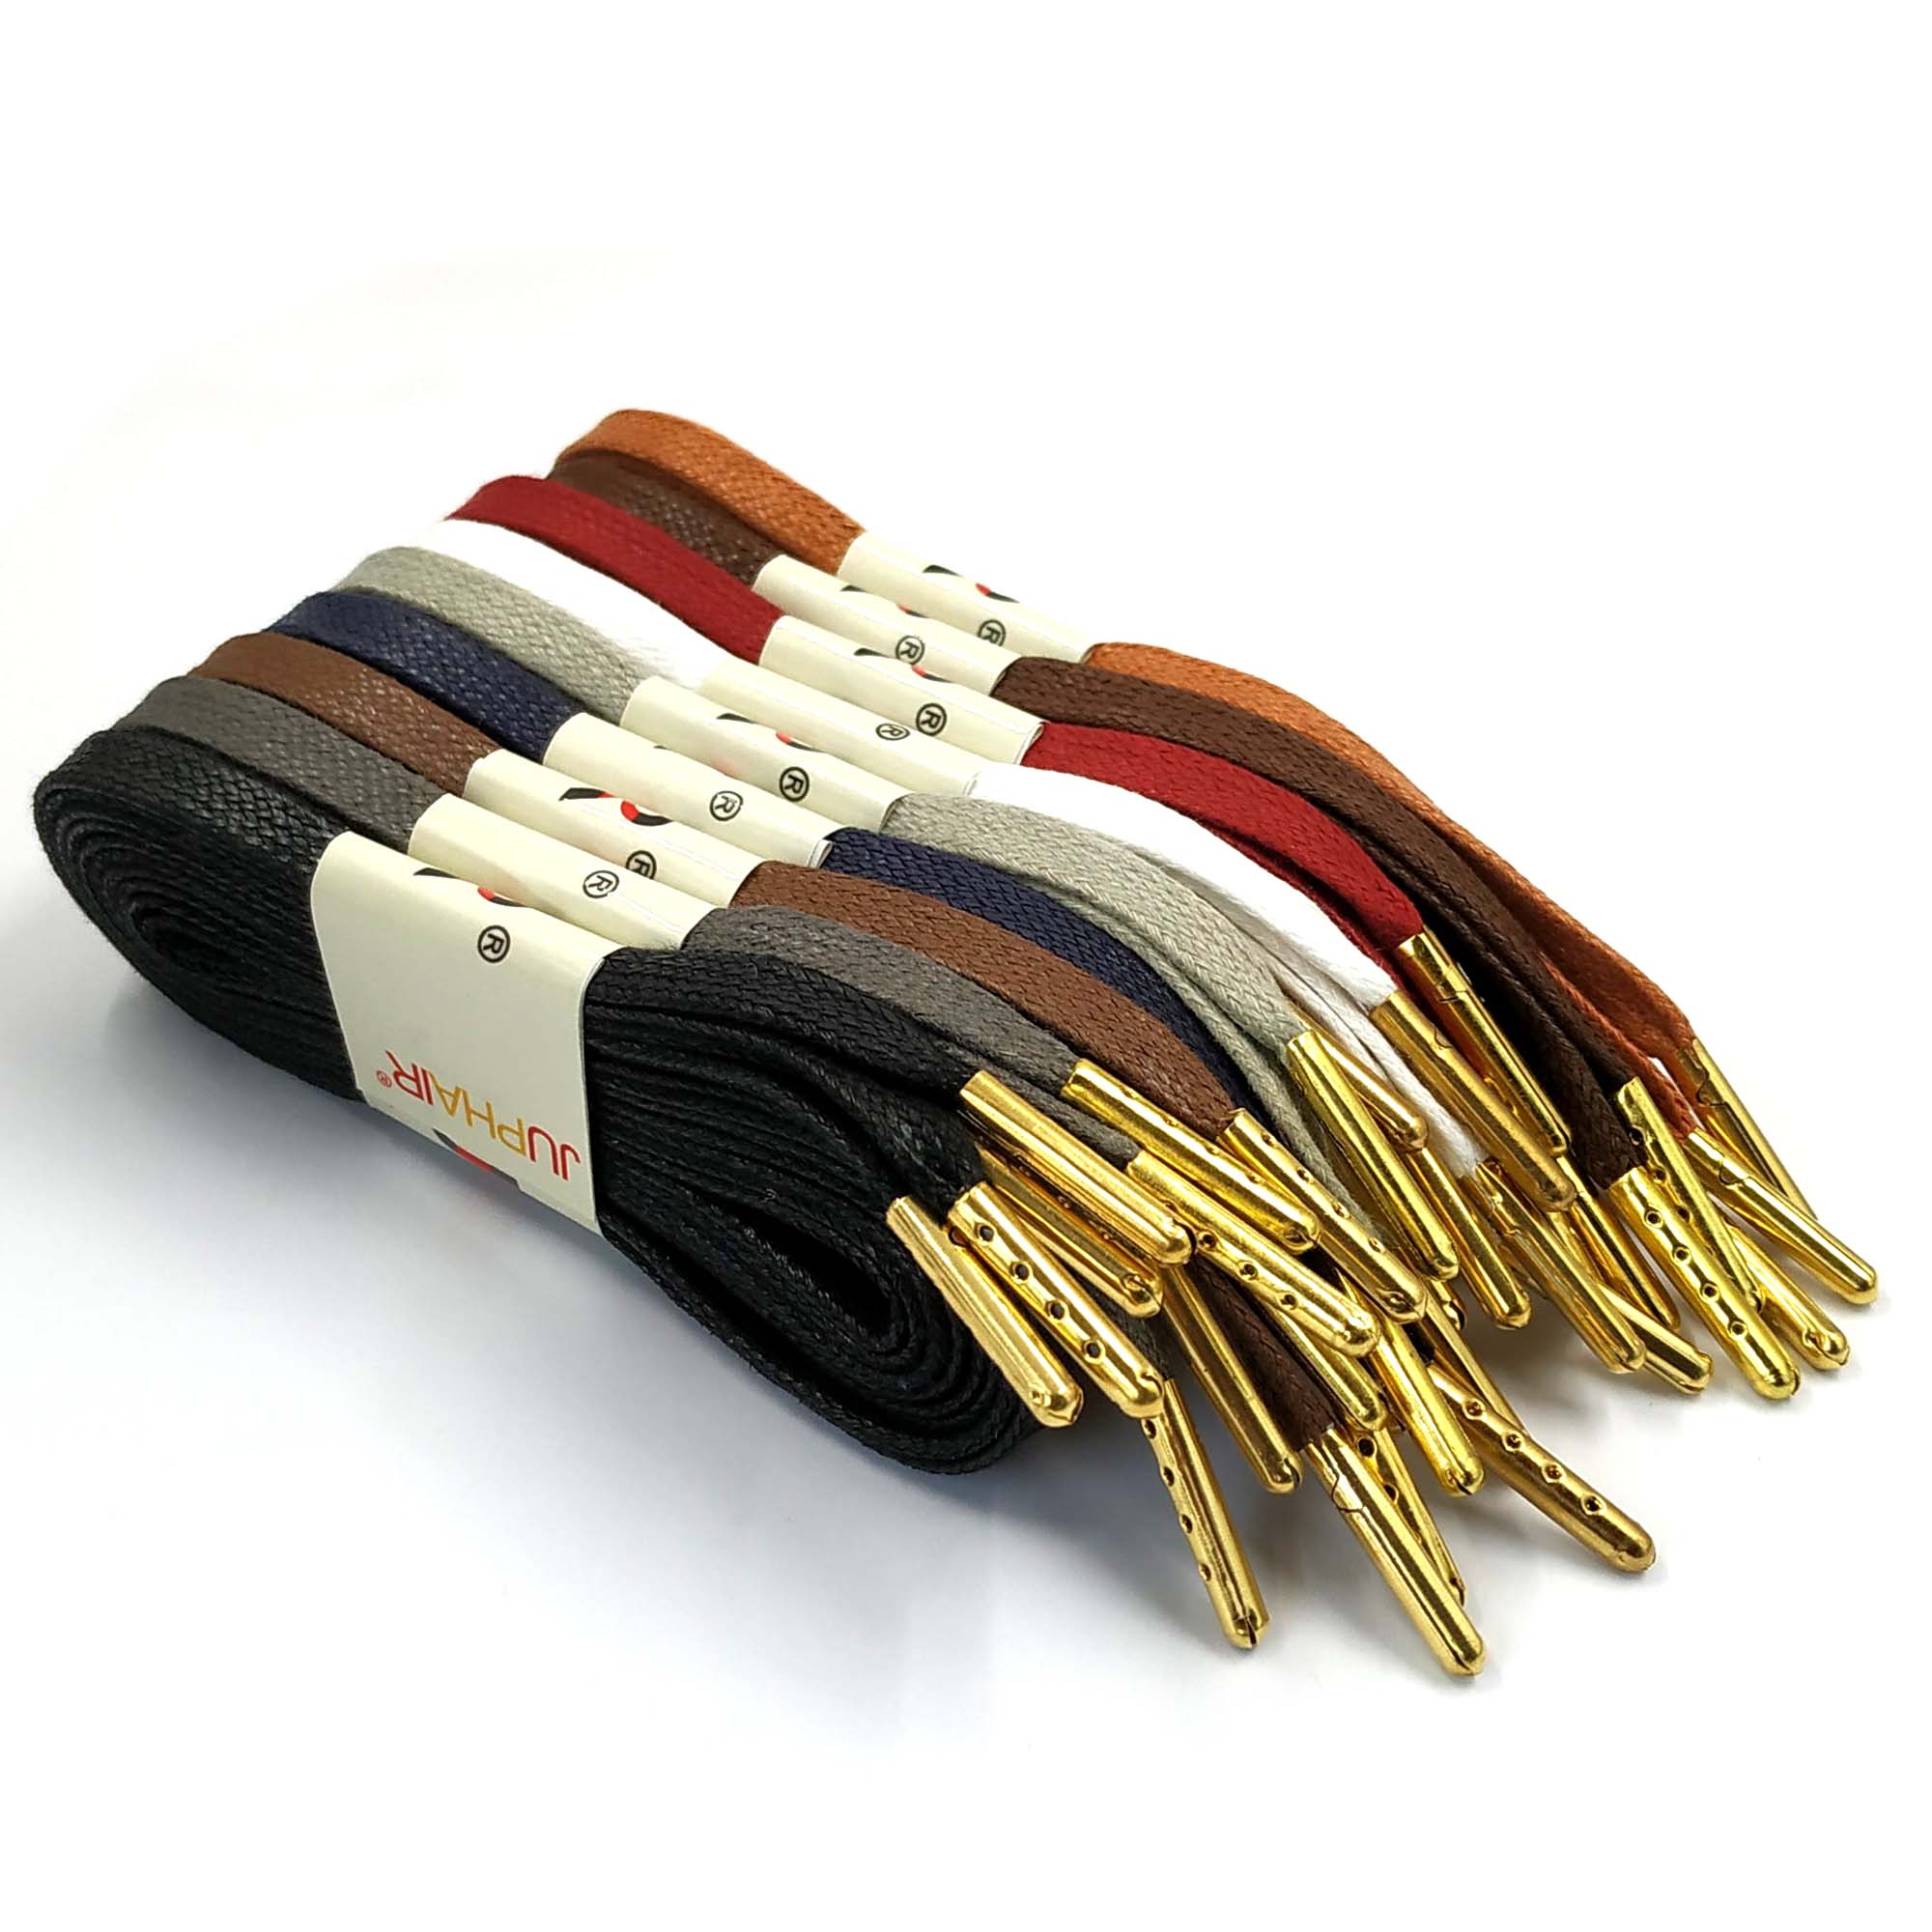 JUPHAIR 1 Pair Multi-Color Waxed Flat Shoelaces Dress with Metal Tips Leather Shoes Sneaker Durable Waterproof Laces